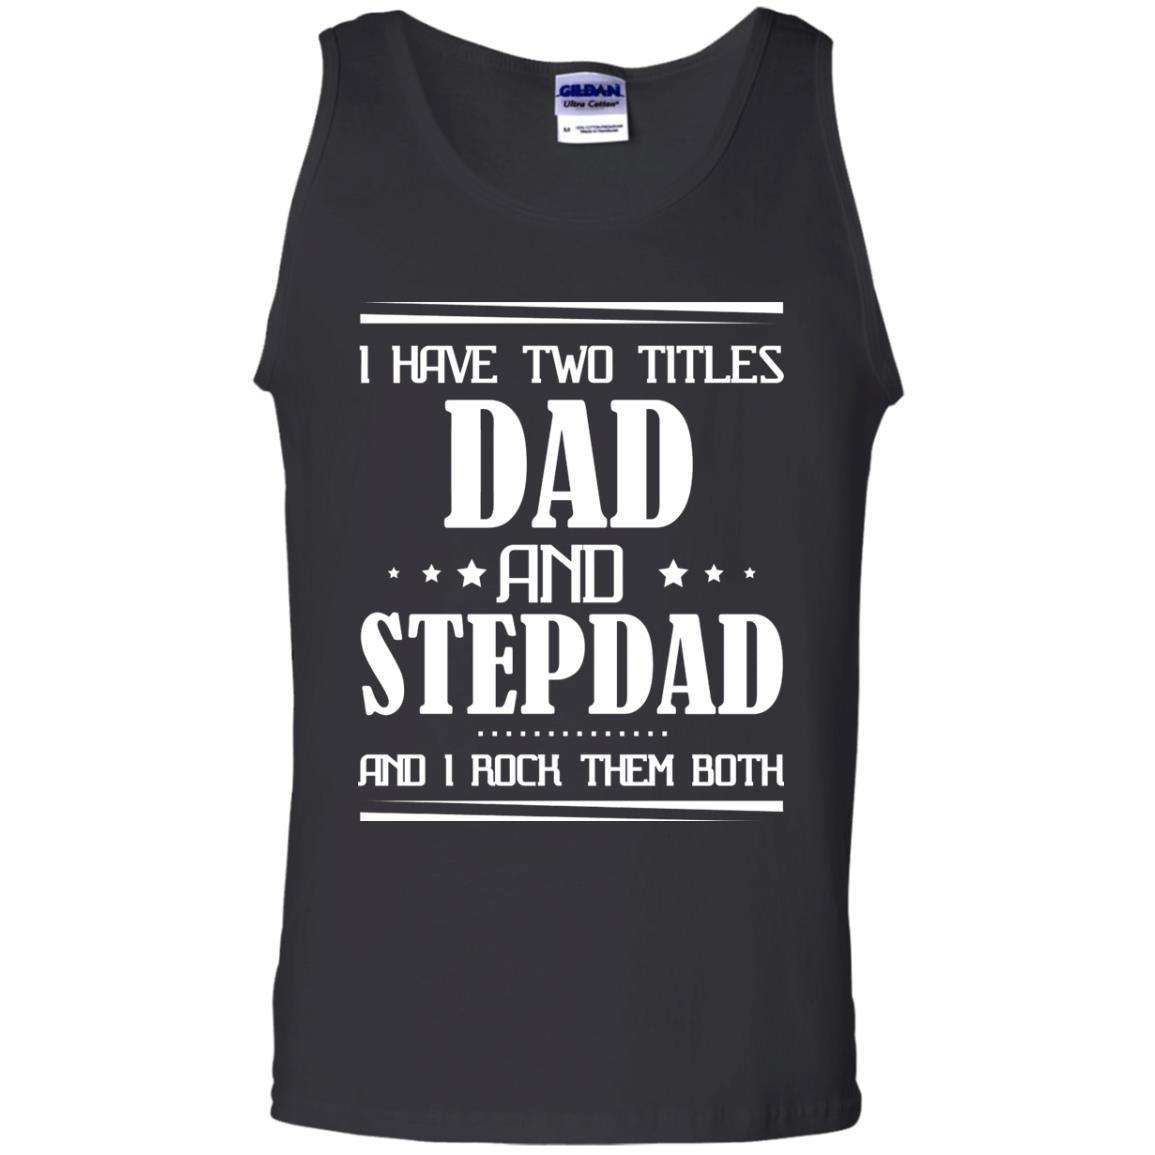 I Have Two Titles Dad And Step Dad And I Rock Them Both ShirtG220 Gildan 100% Cotton Tank Top